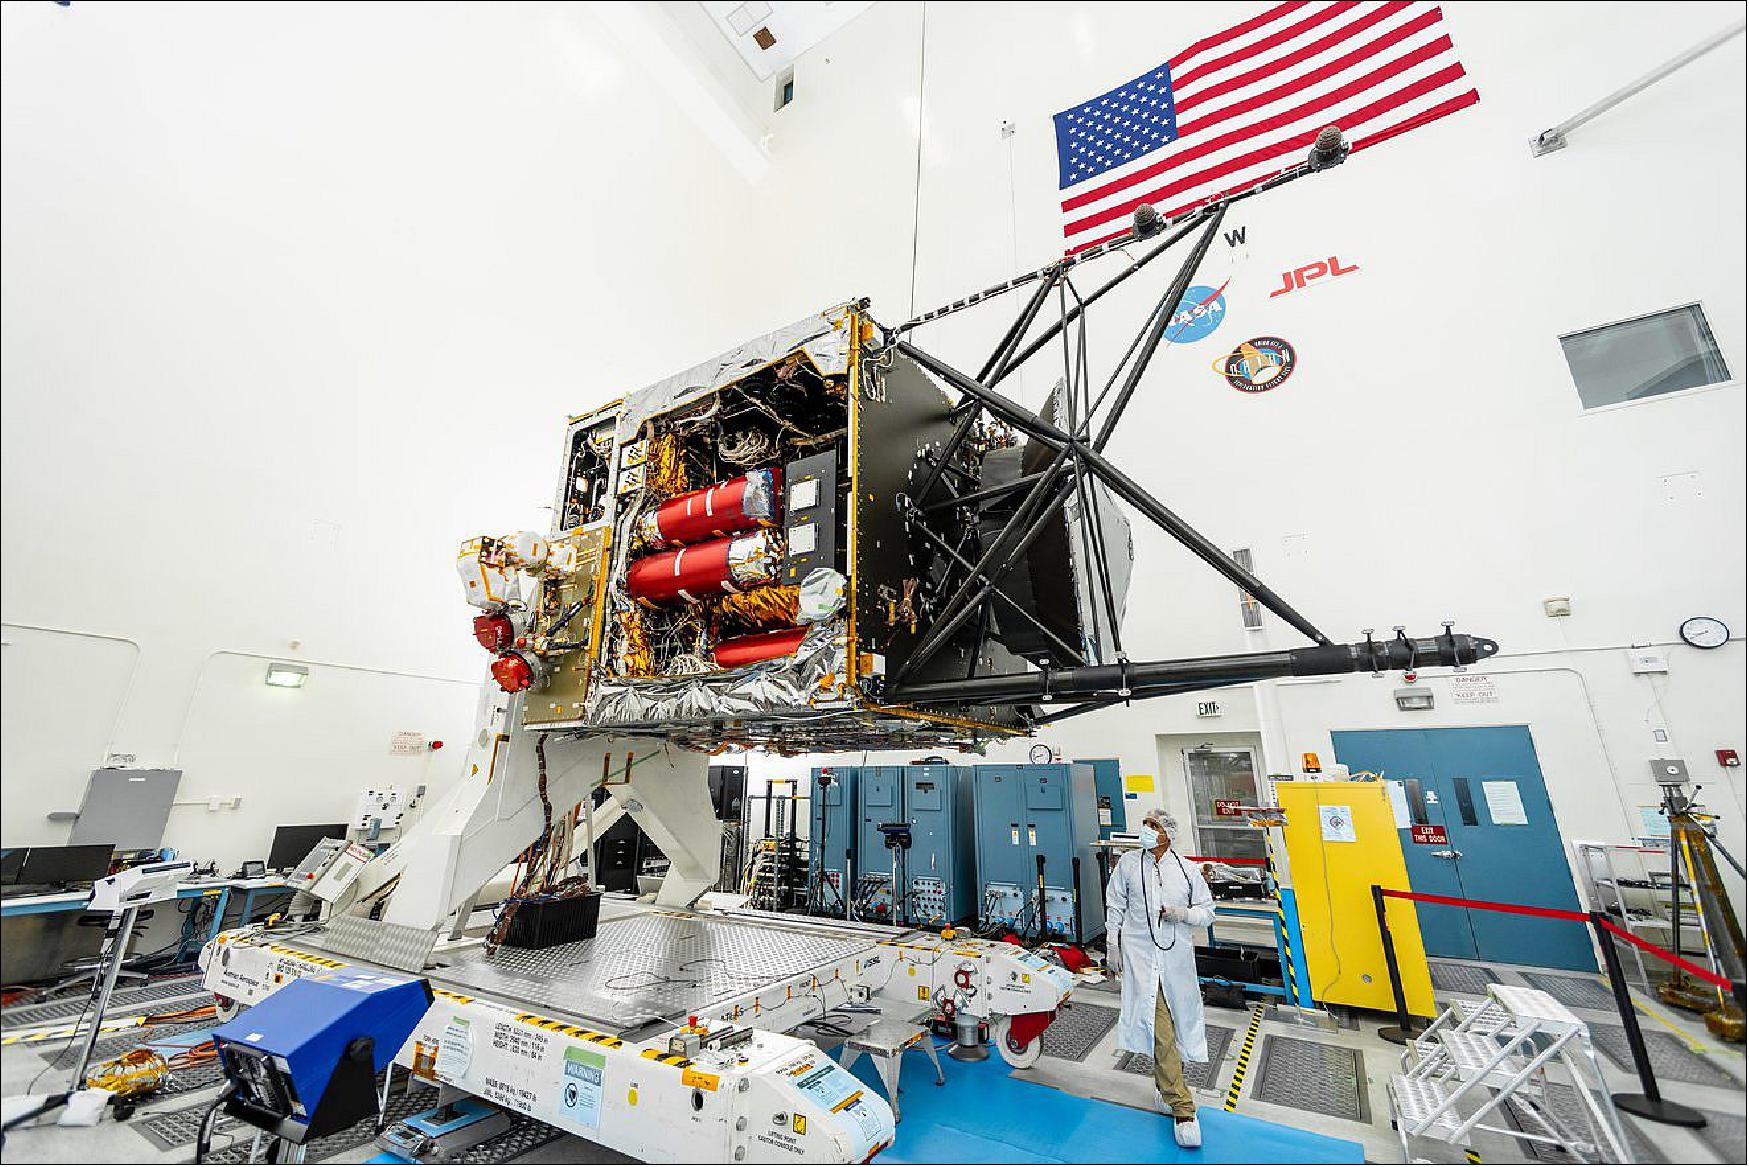 Figure 13: NASA's Psyche spacecraft is in the midst of system integration and test at JPL. This image was taken on August 18, 2021, less than a year from launch in August 2022 (image credit: NASA/JPL-Caltech)